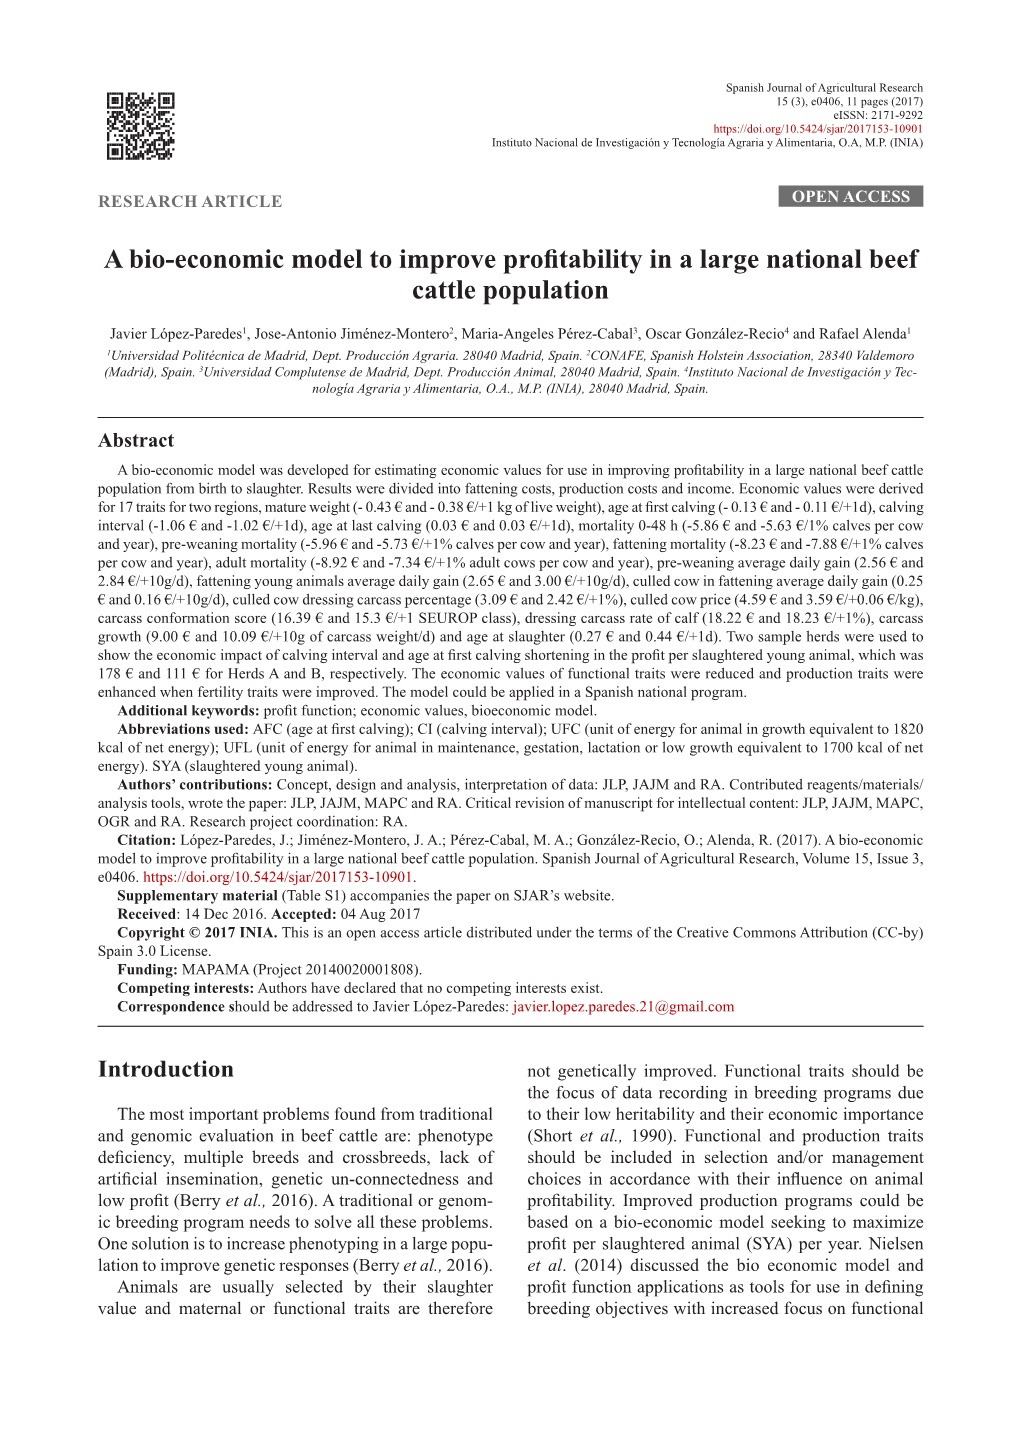 A Bio-Economic Model to Improve Profitability in a Large National Beef Cattle Population